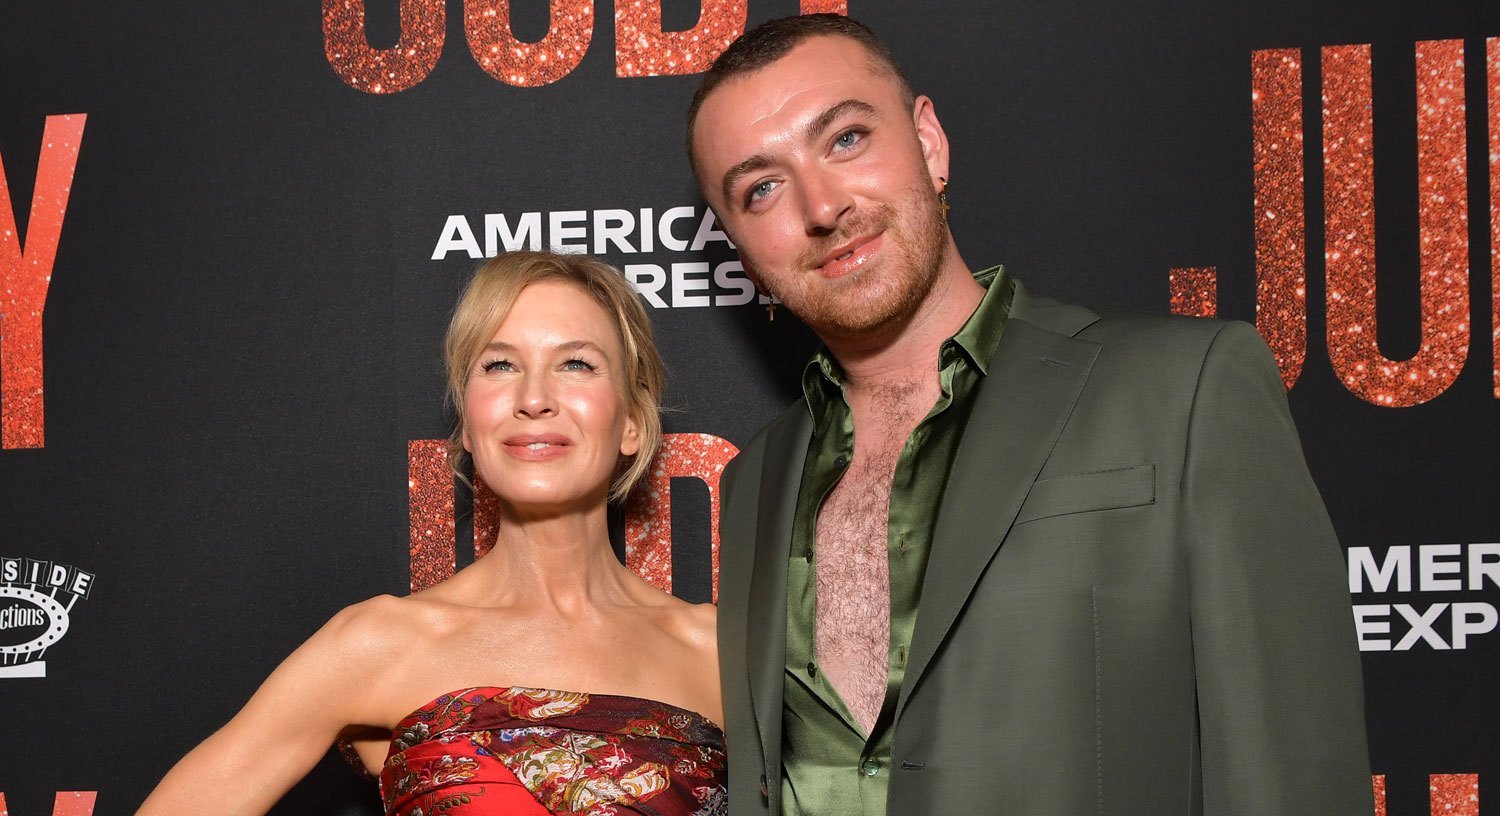 renee-zellweger-is-joined-by-sam-smith-at-judy-premiere